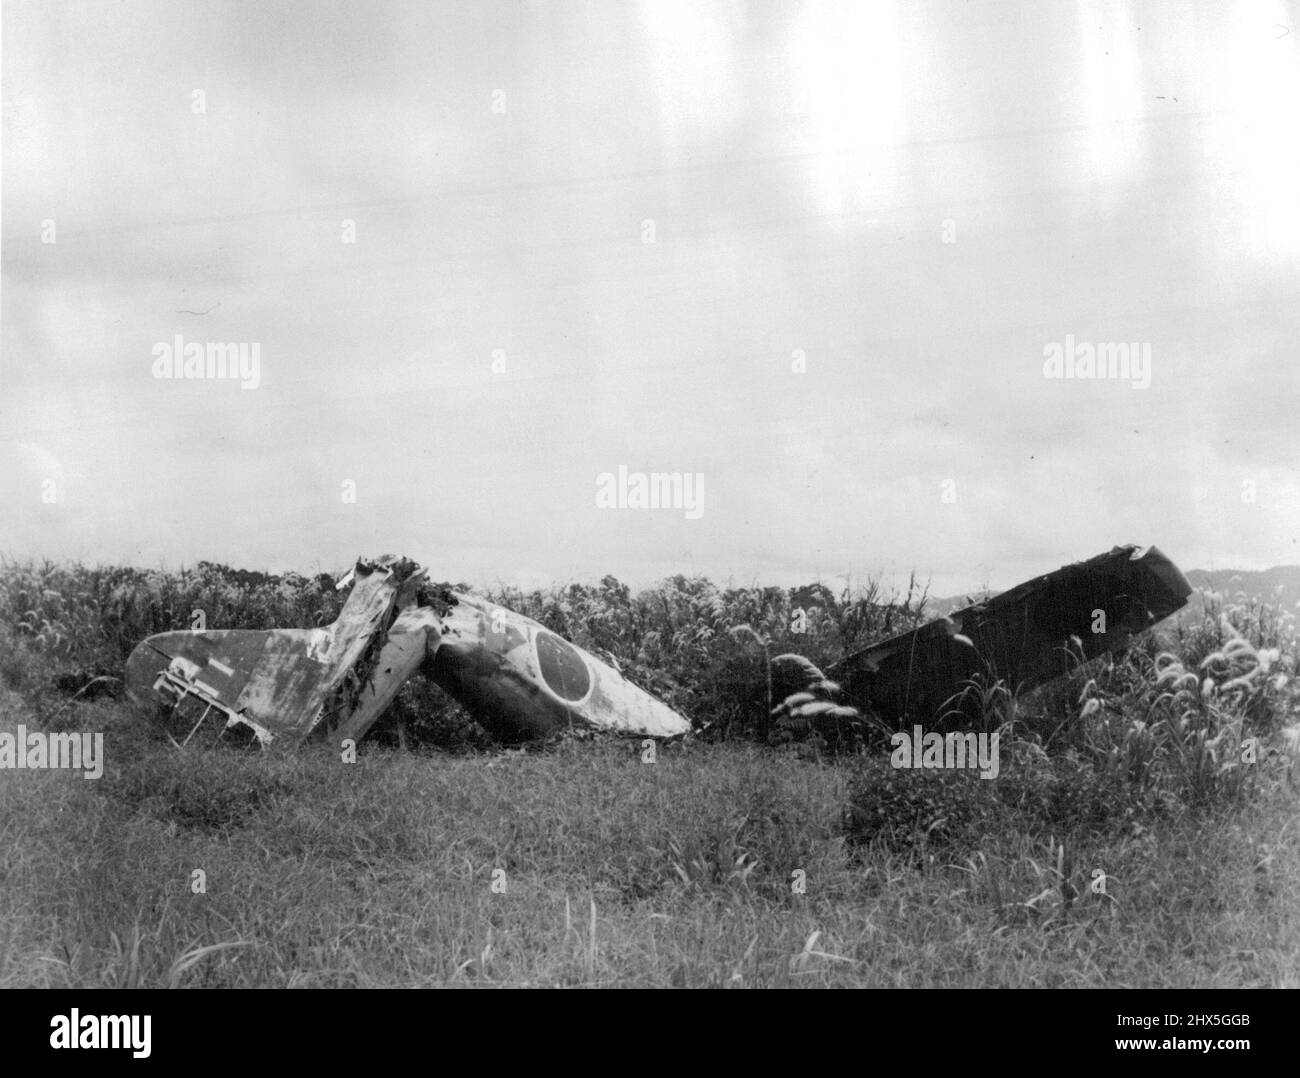 New Britain: A wrecked Japanese fighter plane on the Gasmata airstrip. It is a HAMP type zero fighter. May 01, 1944. (Photo by Commonwealth Department of Information). Stock Photo